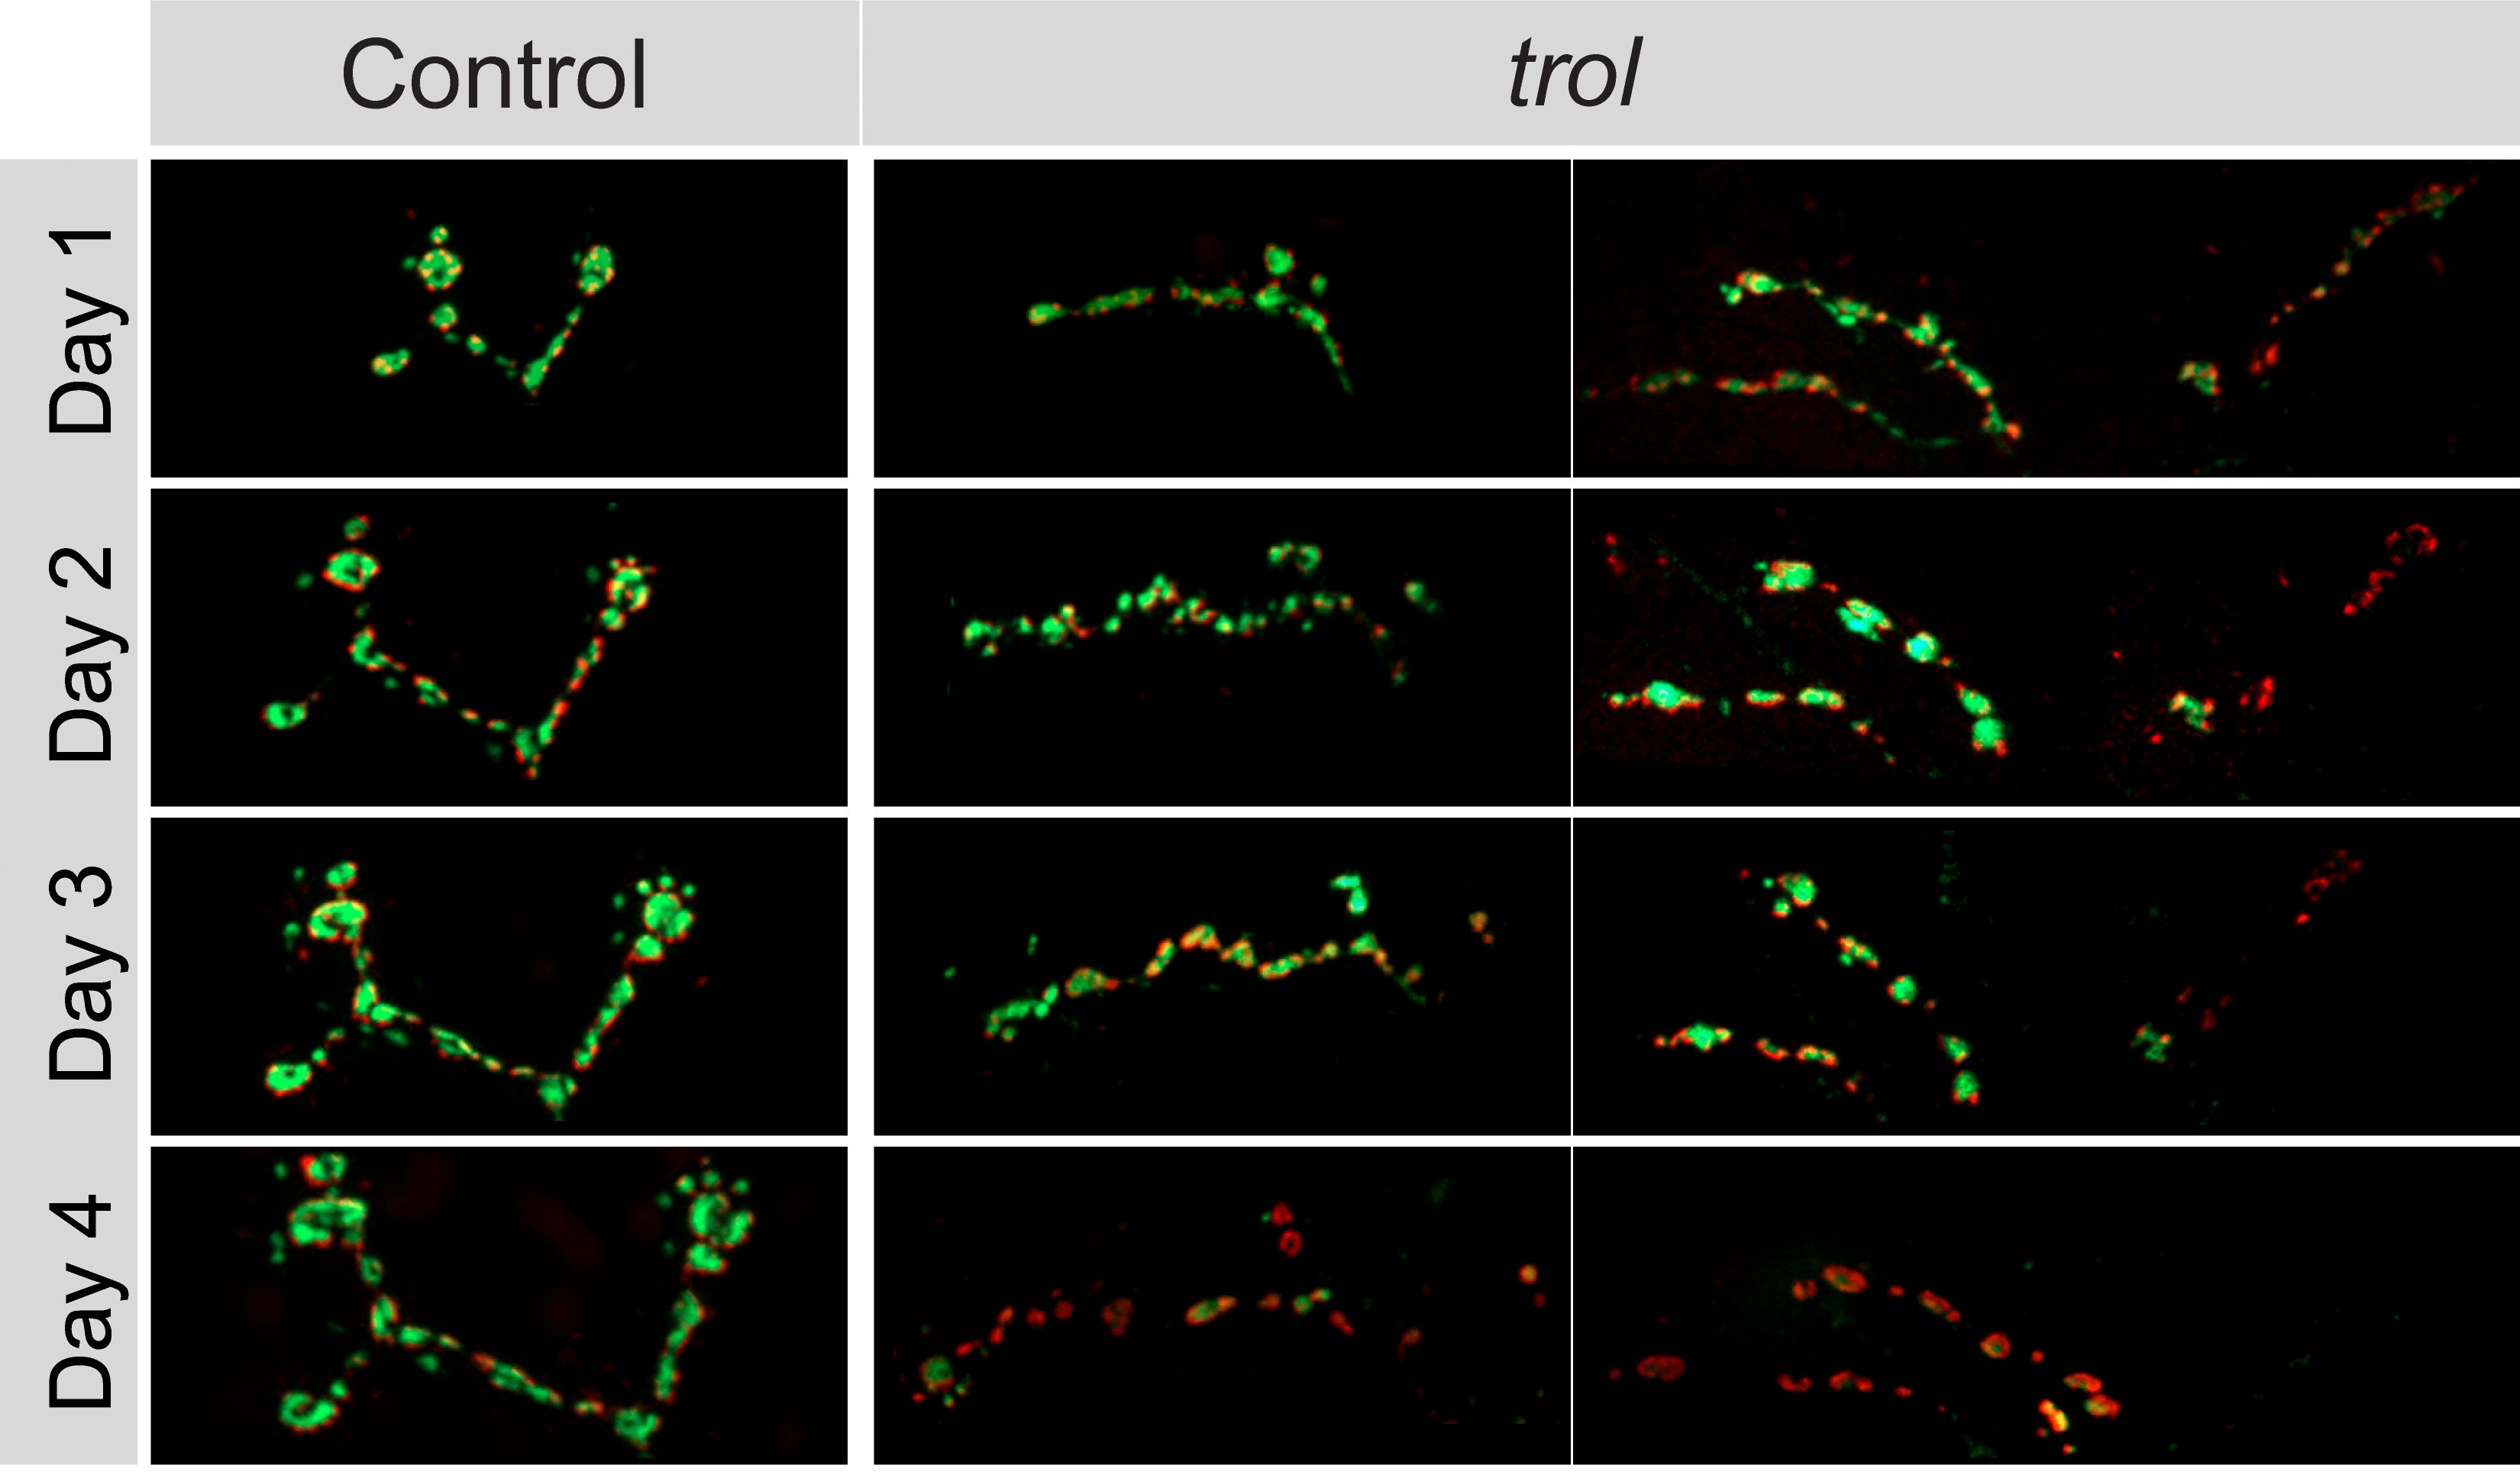 A 2x4 table of images. Each row represents a day. Left column is control, right column is "trol" meaning the trol gene has been disabled. Control images show a neuron's axon looking healthy all four days. The trol images show the axon starting out fine but fading over time.